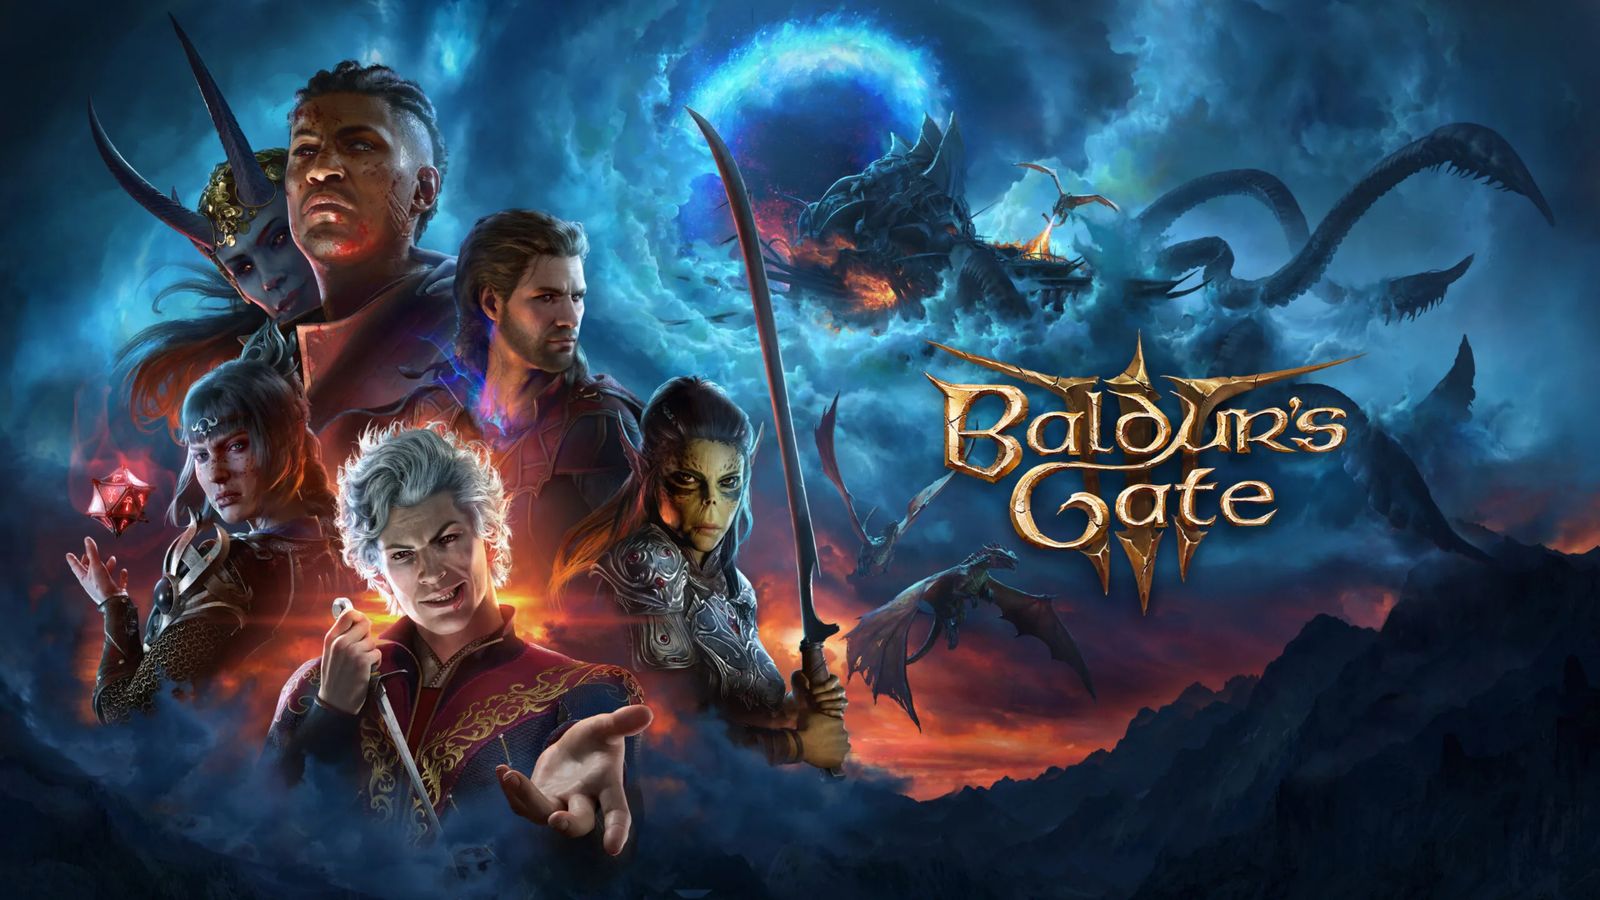 Get in the know about the Baldur's Gate 3 PC requirements in order to run the game on either Windows or Mac.